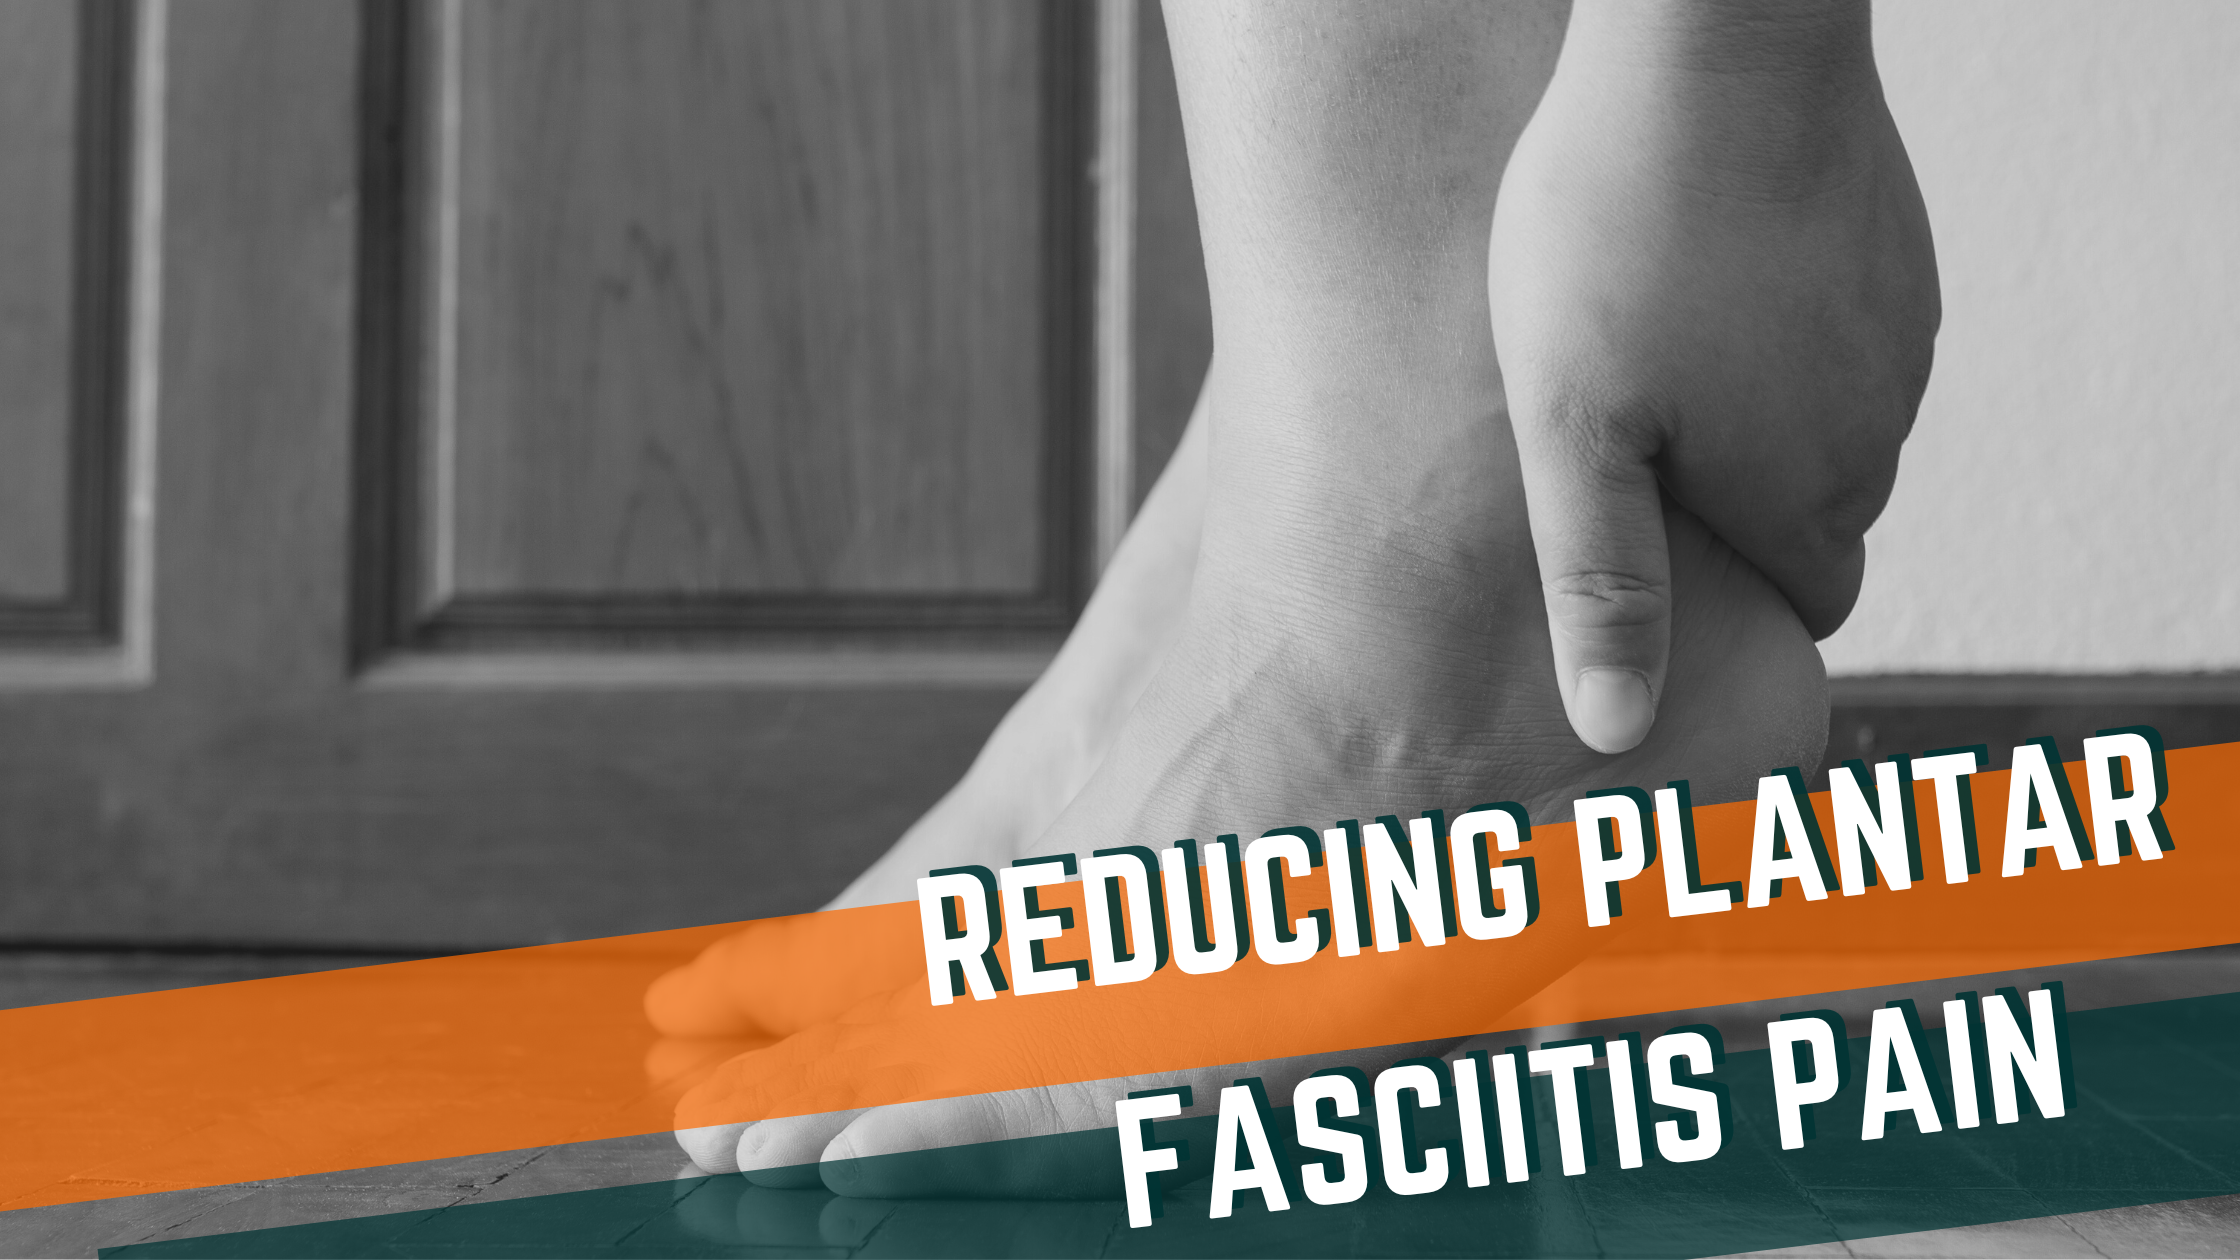 Featured image for “How to Reduce Plantar Fasciitis Pain”